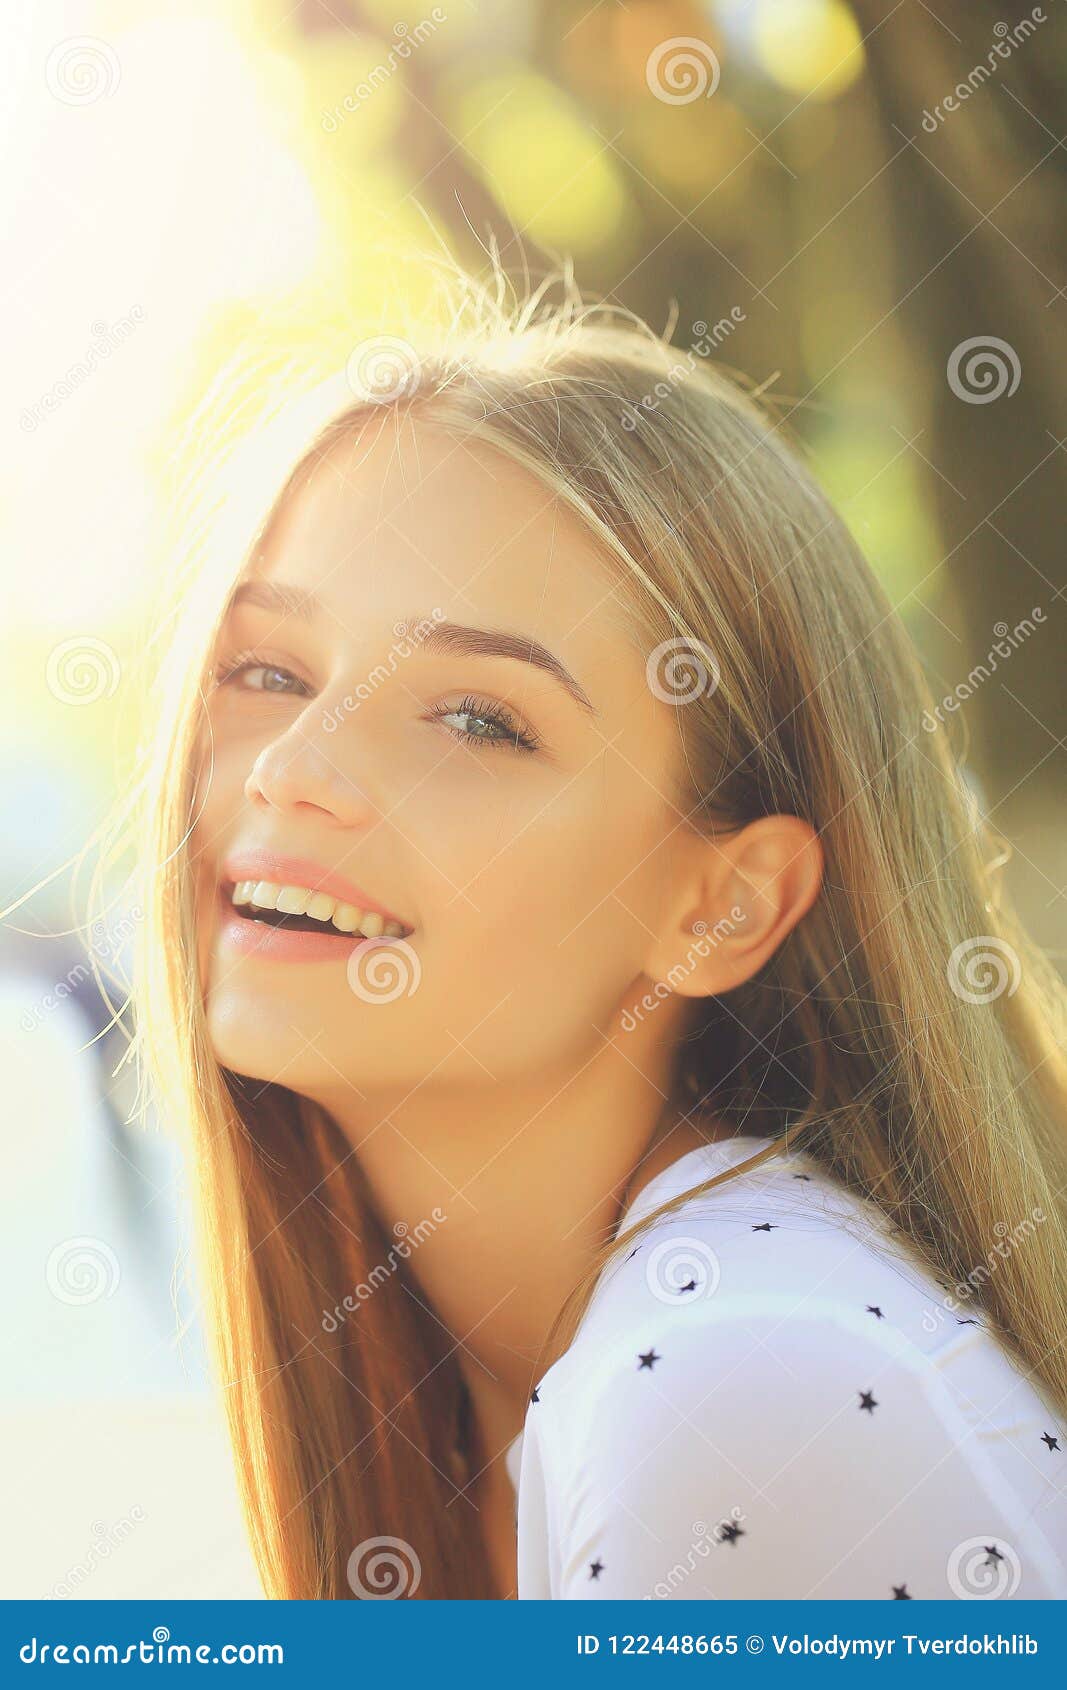 Blonde Cute Girl on Sunny Day Stock Image - Image of smiling, outdoor:  122448665